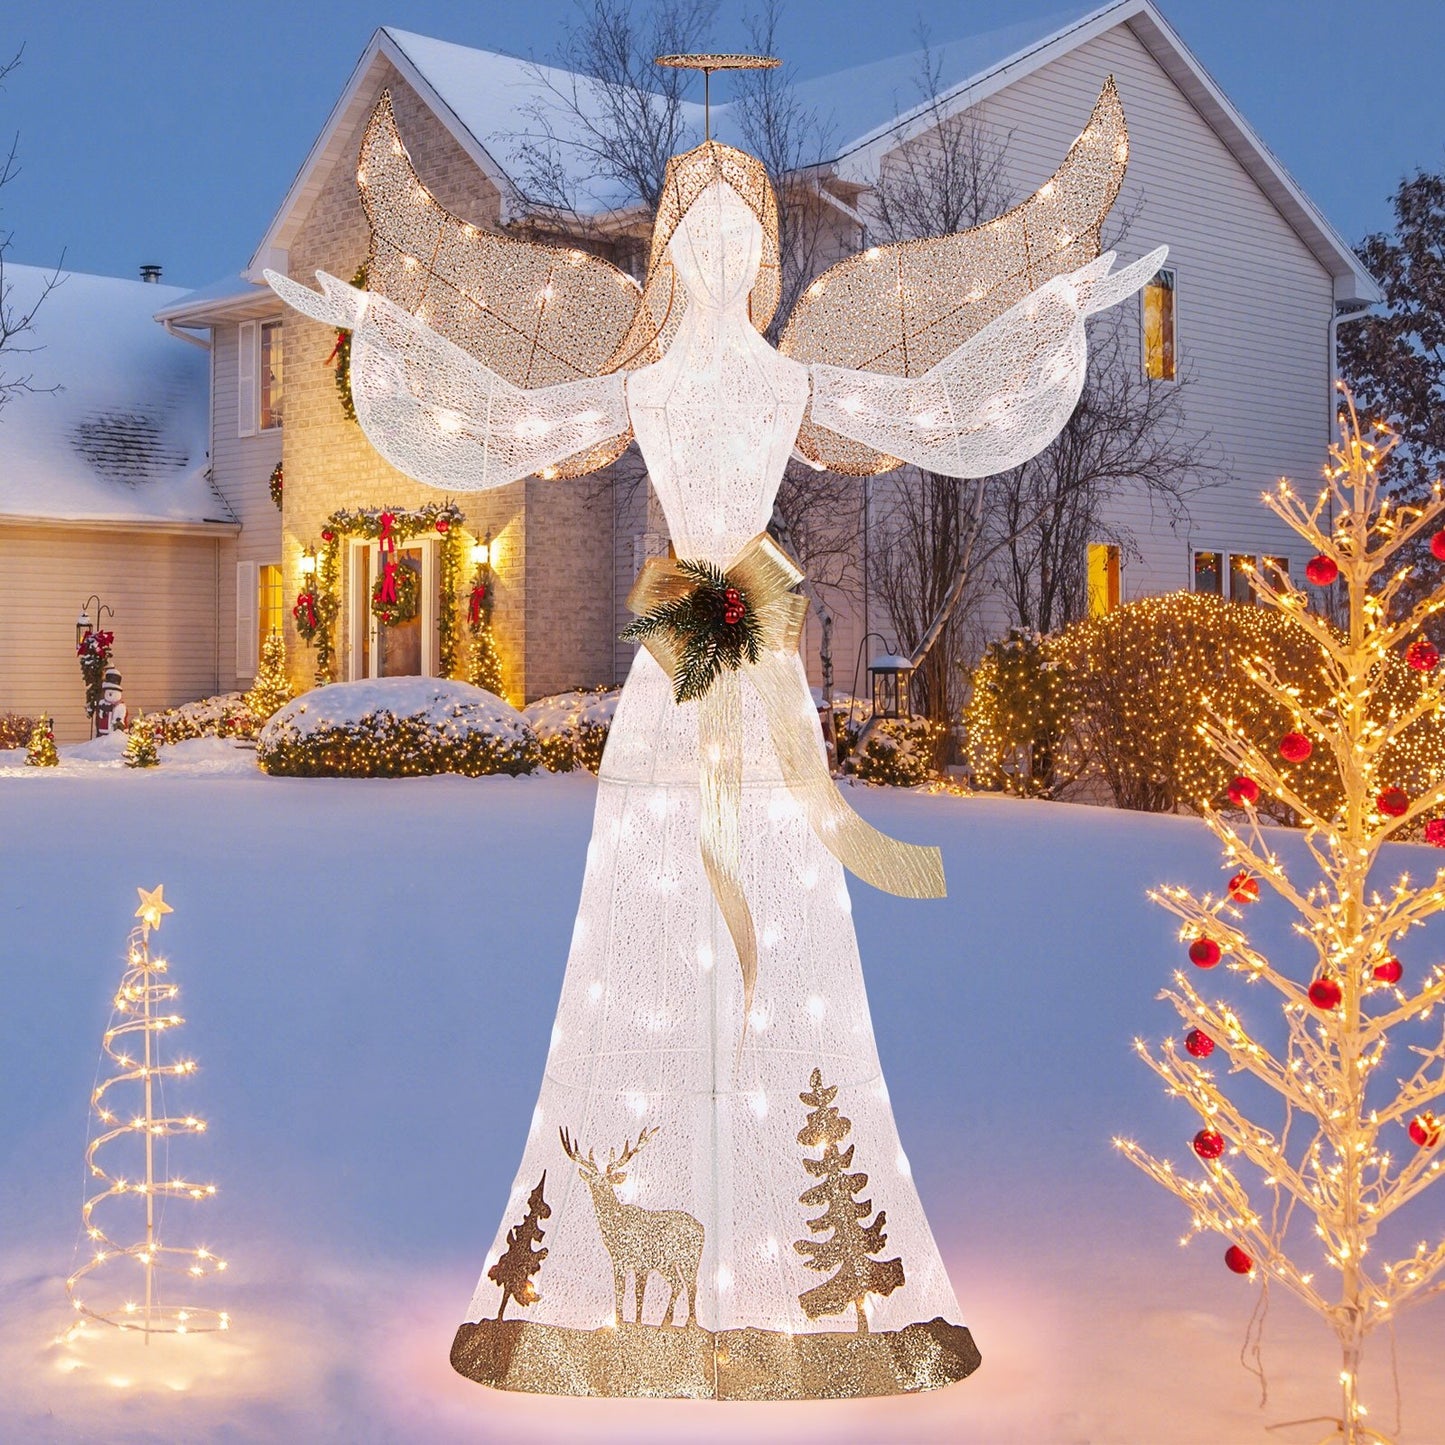 5 Feet Pre-lit 3D Glittered Christmas Angel with 100 Warm White Lights, White